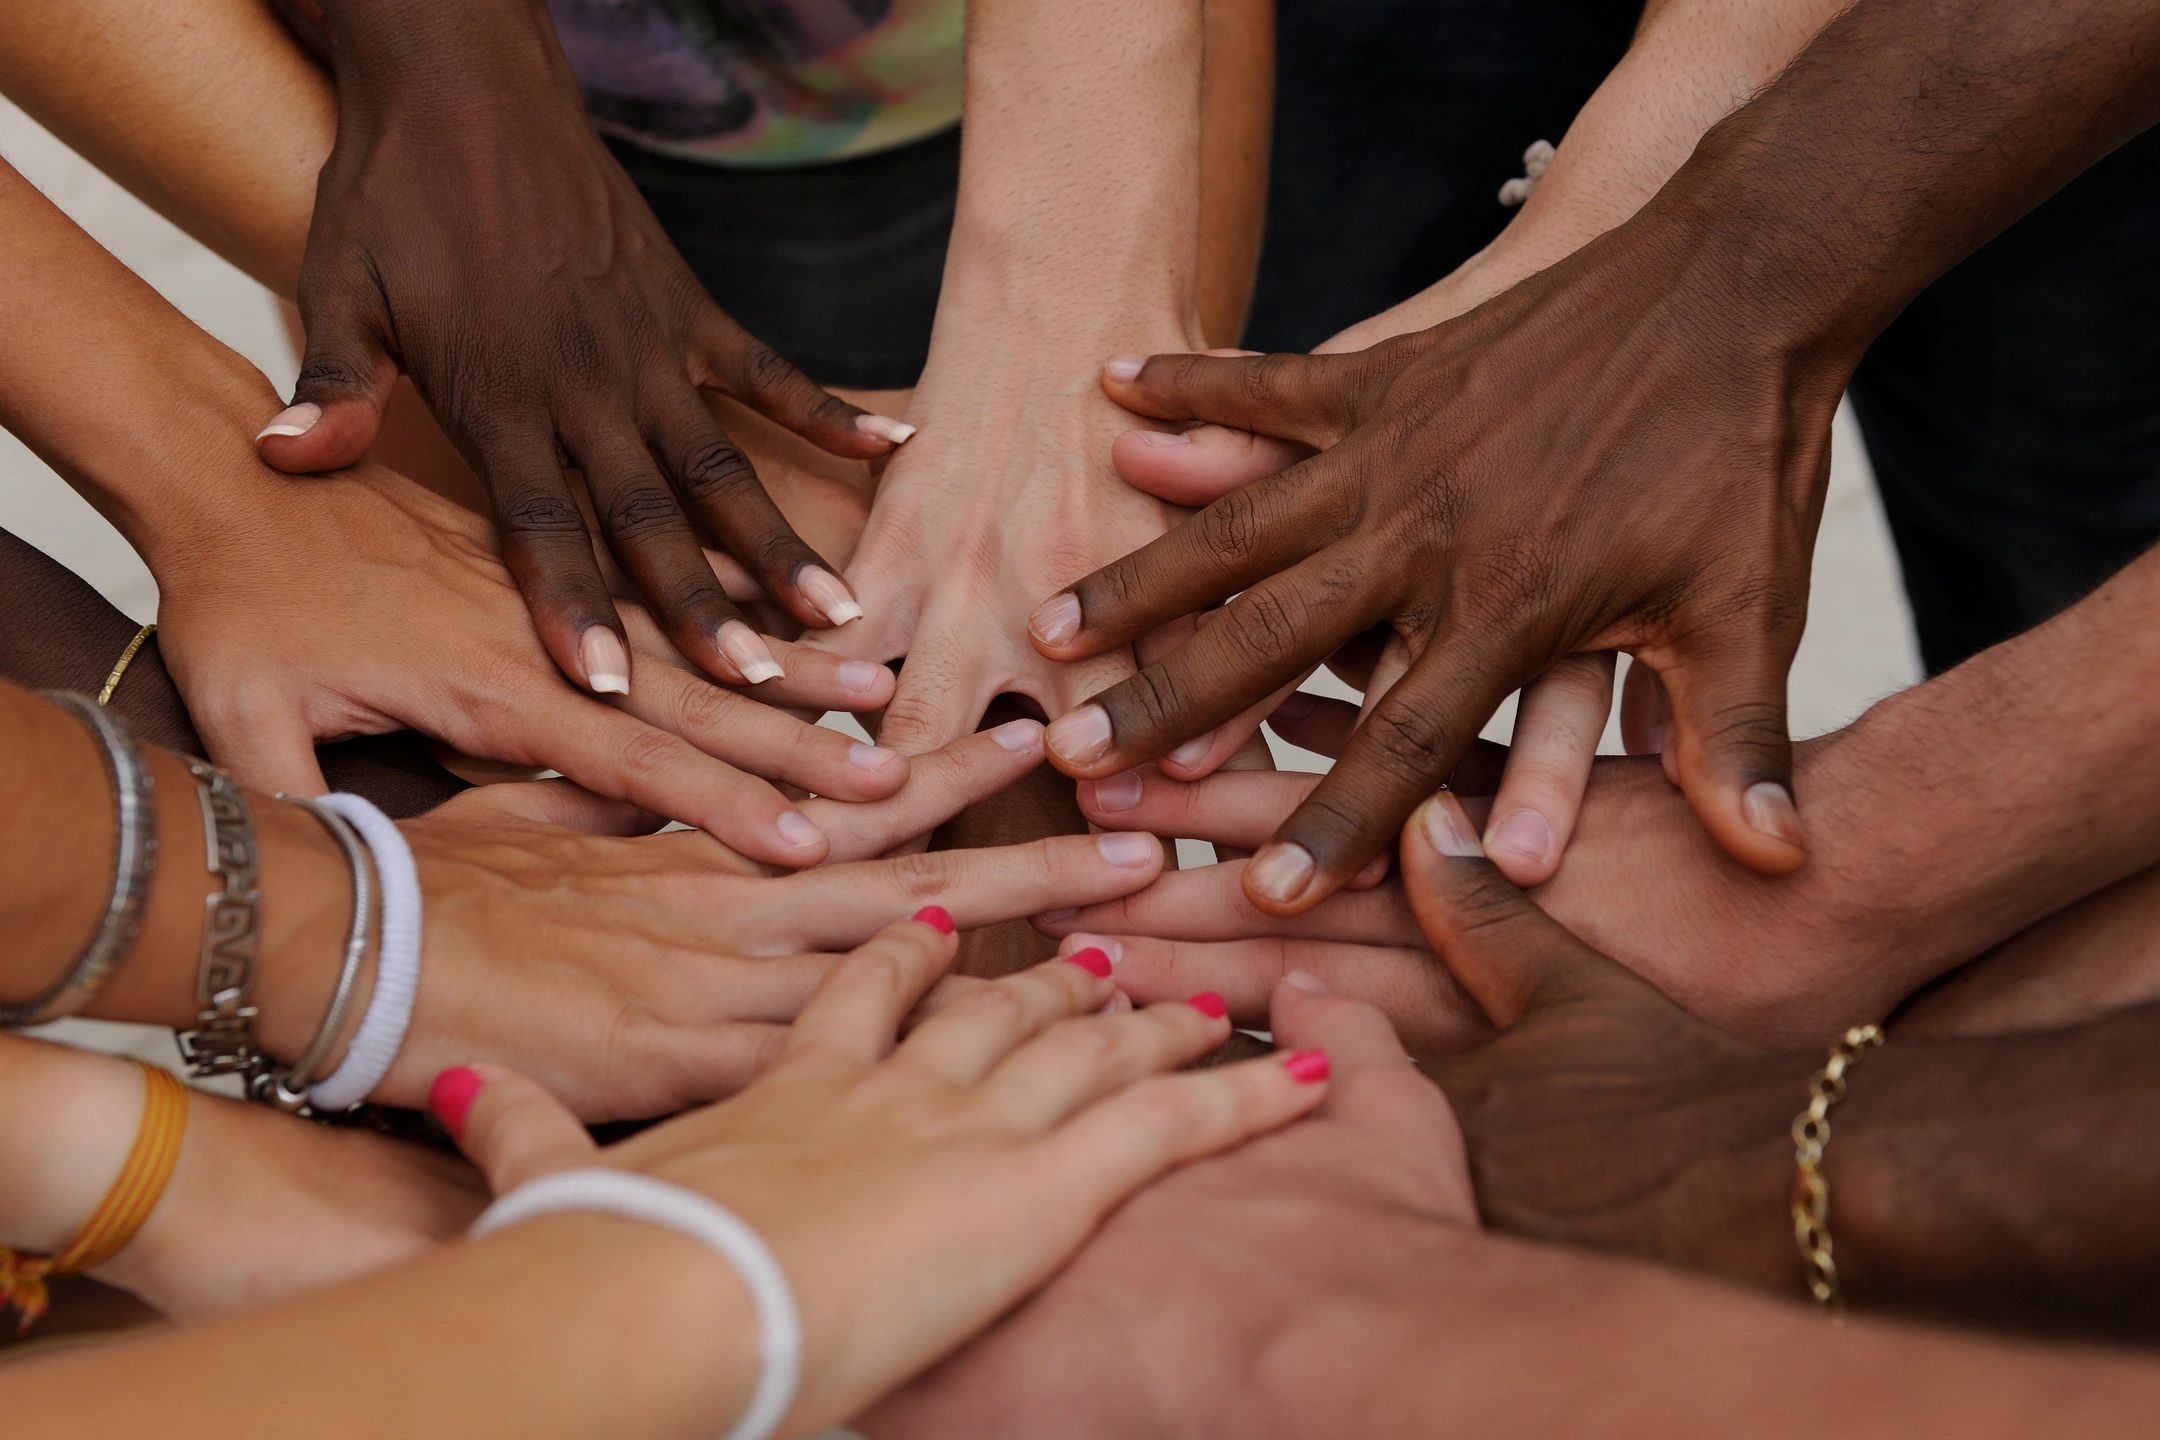 Image Of Several Women's Hands Of Different Races All Touching In The Middle.